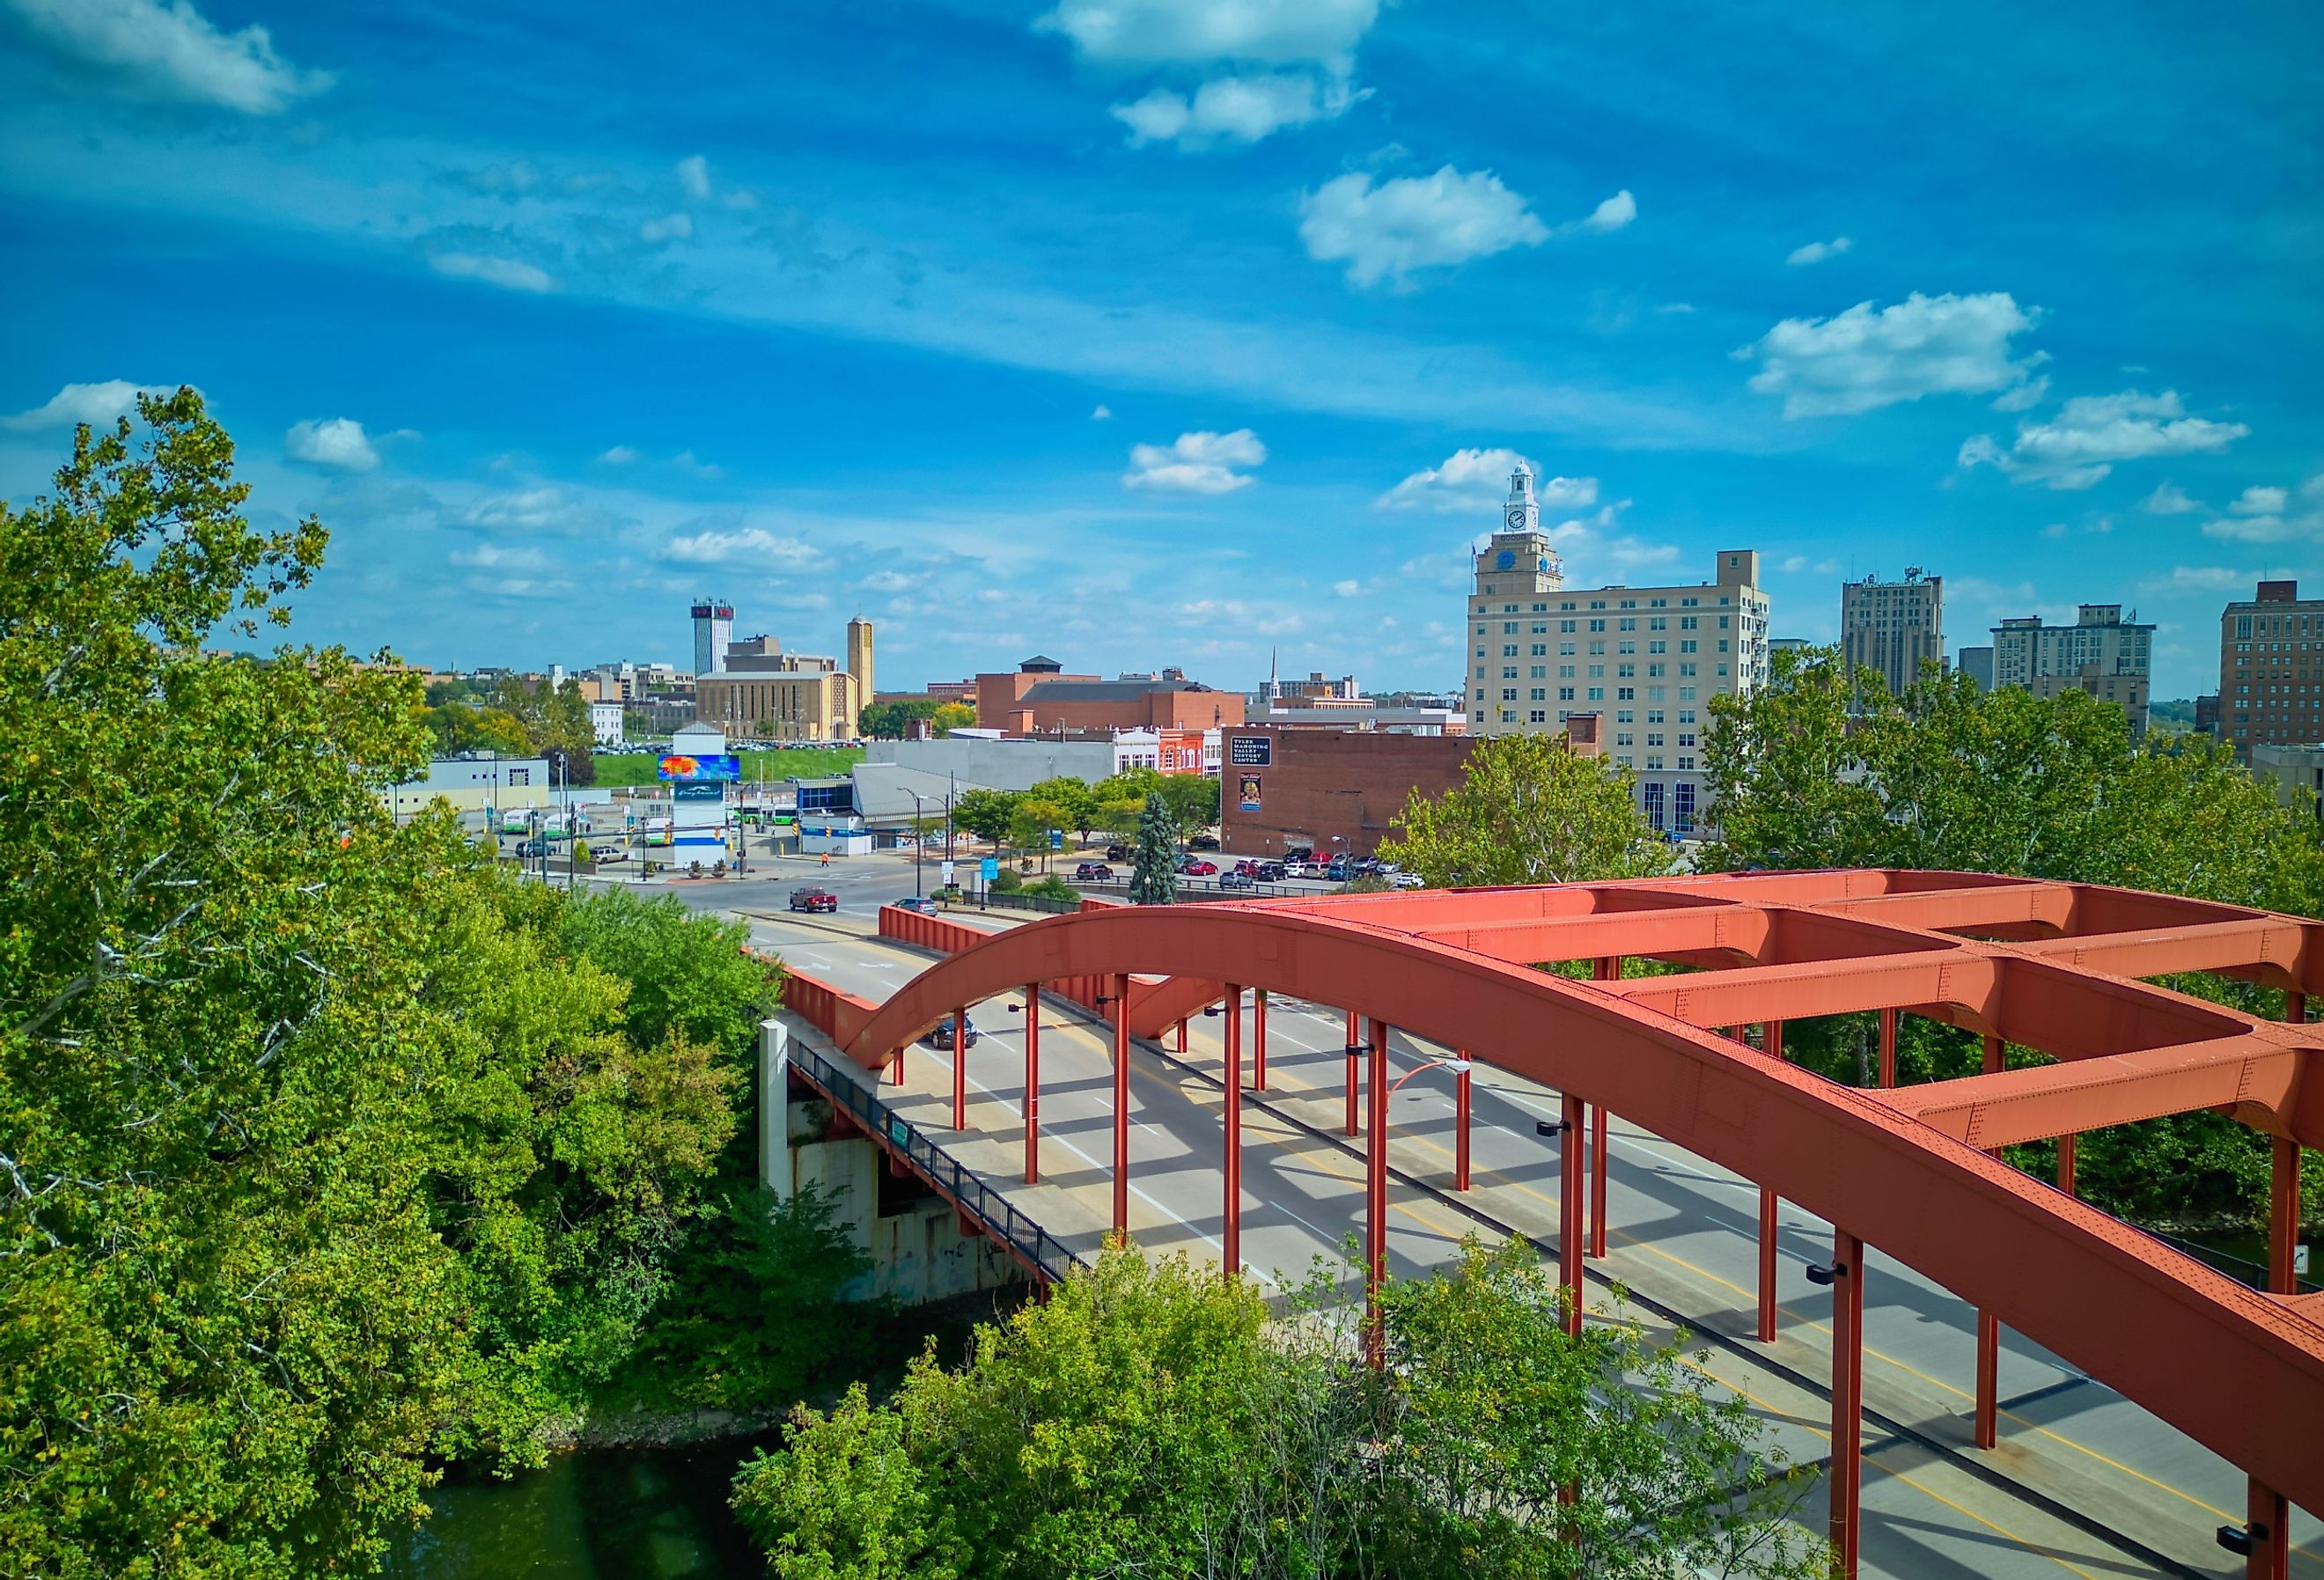 Youngstown, Ohio seen from the perspective of the Mahoning Ave Bridge. Image credit Wirestock Creators via Shutterstock